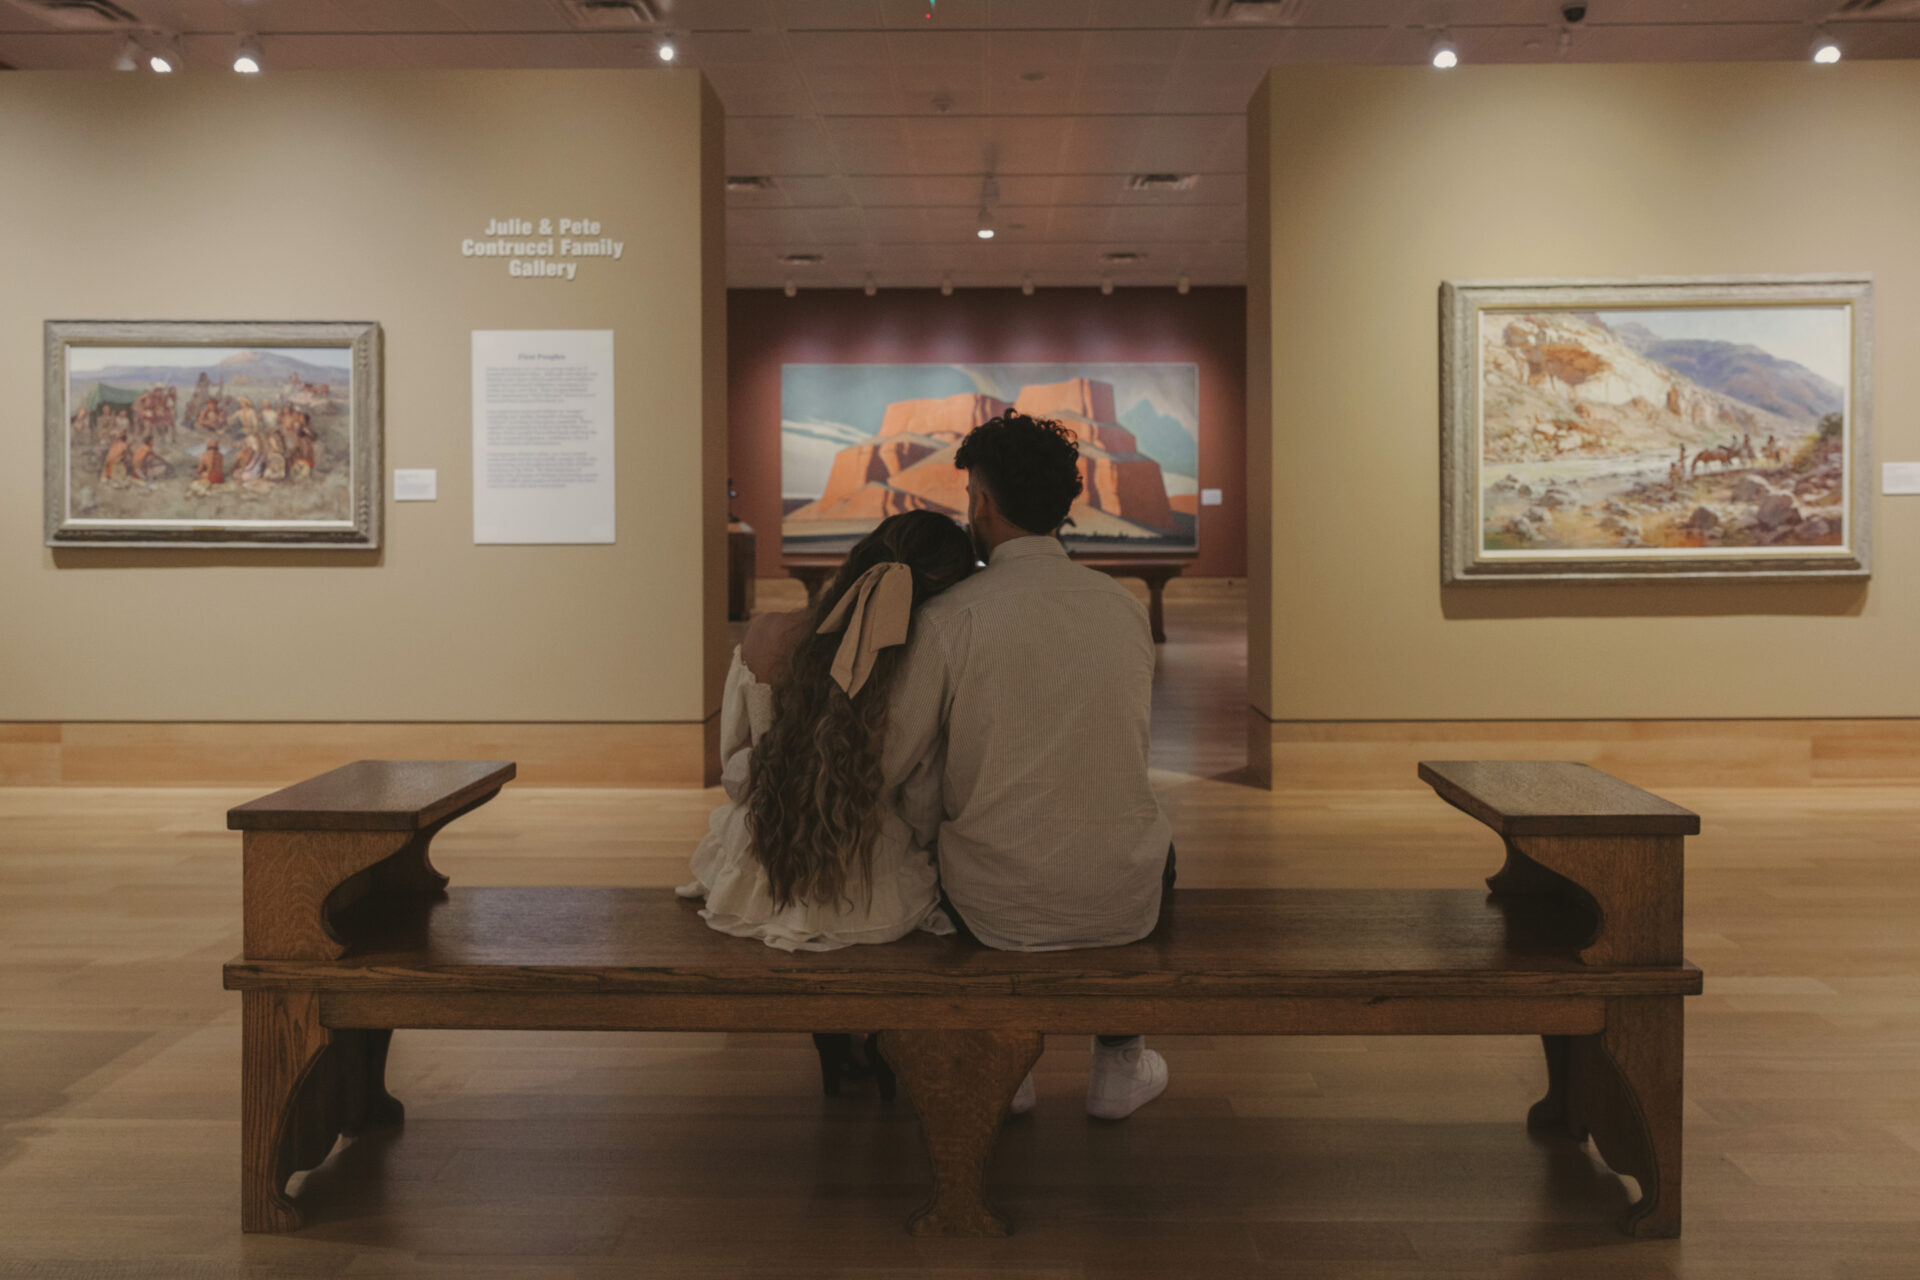 A man and a women sitting on a bench admiring art together at a museum in Cartersville Georgia